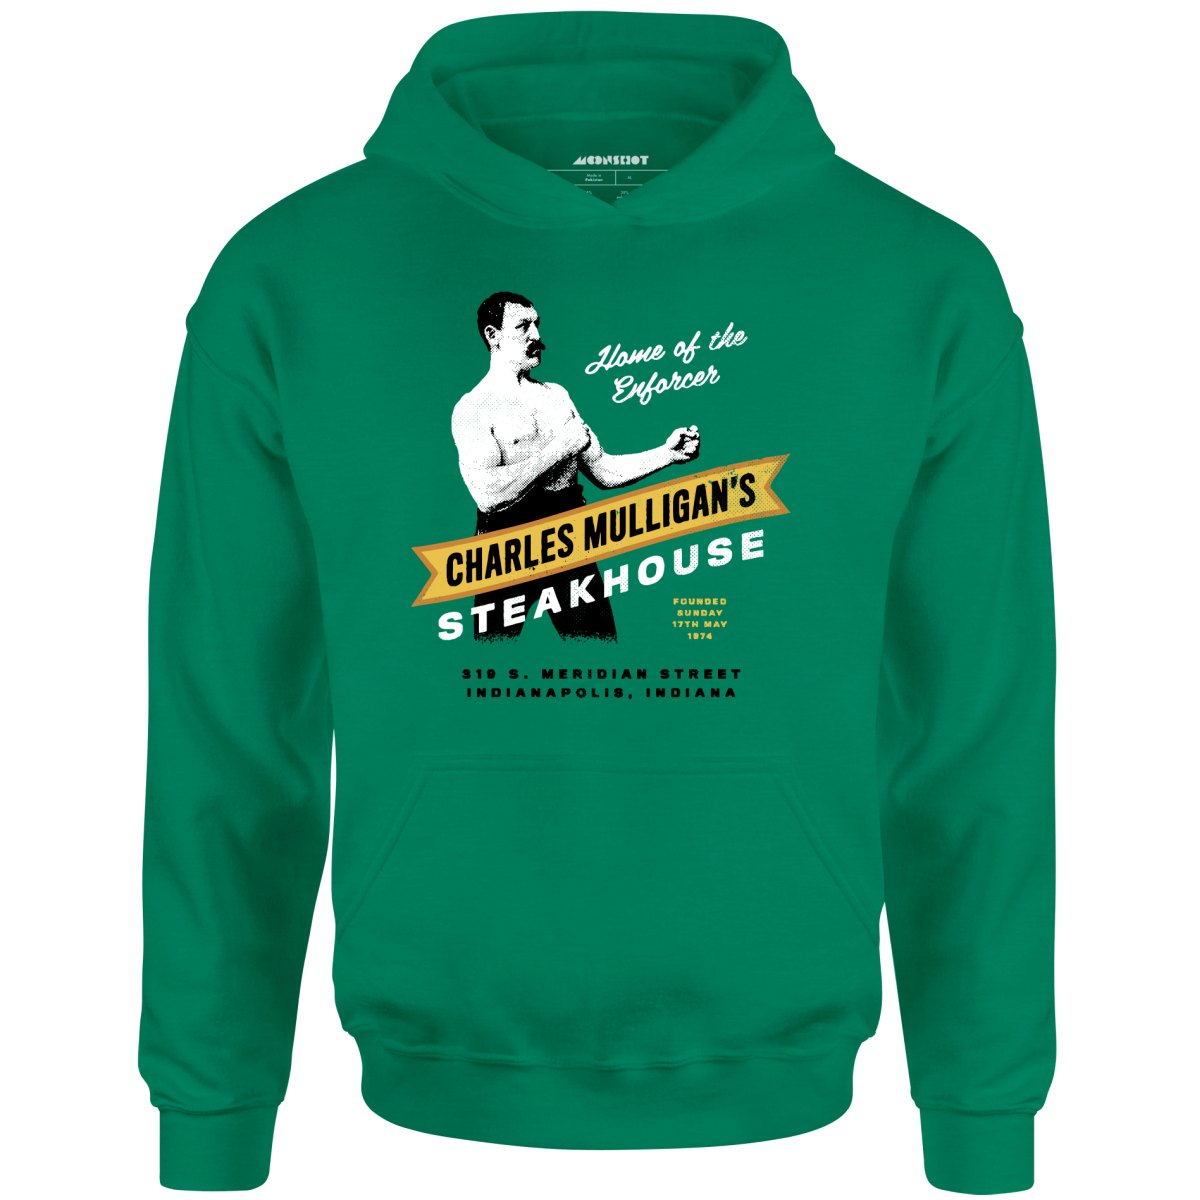 Charles Mulligan's Steakhouse - Parks and Recreation - Unisex Hoodie